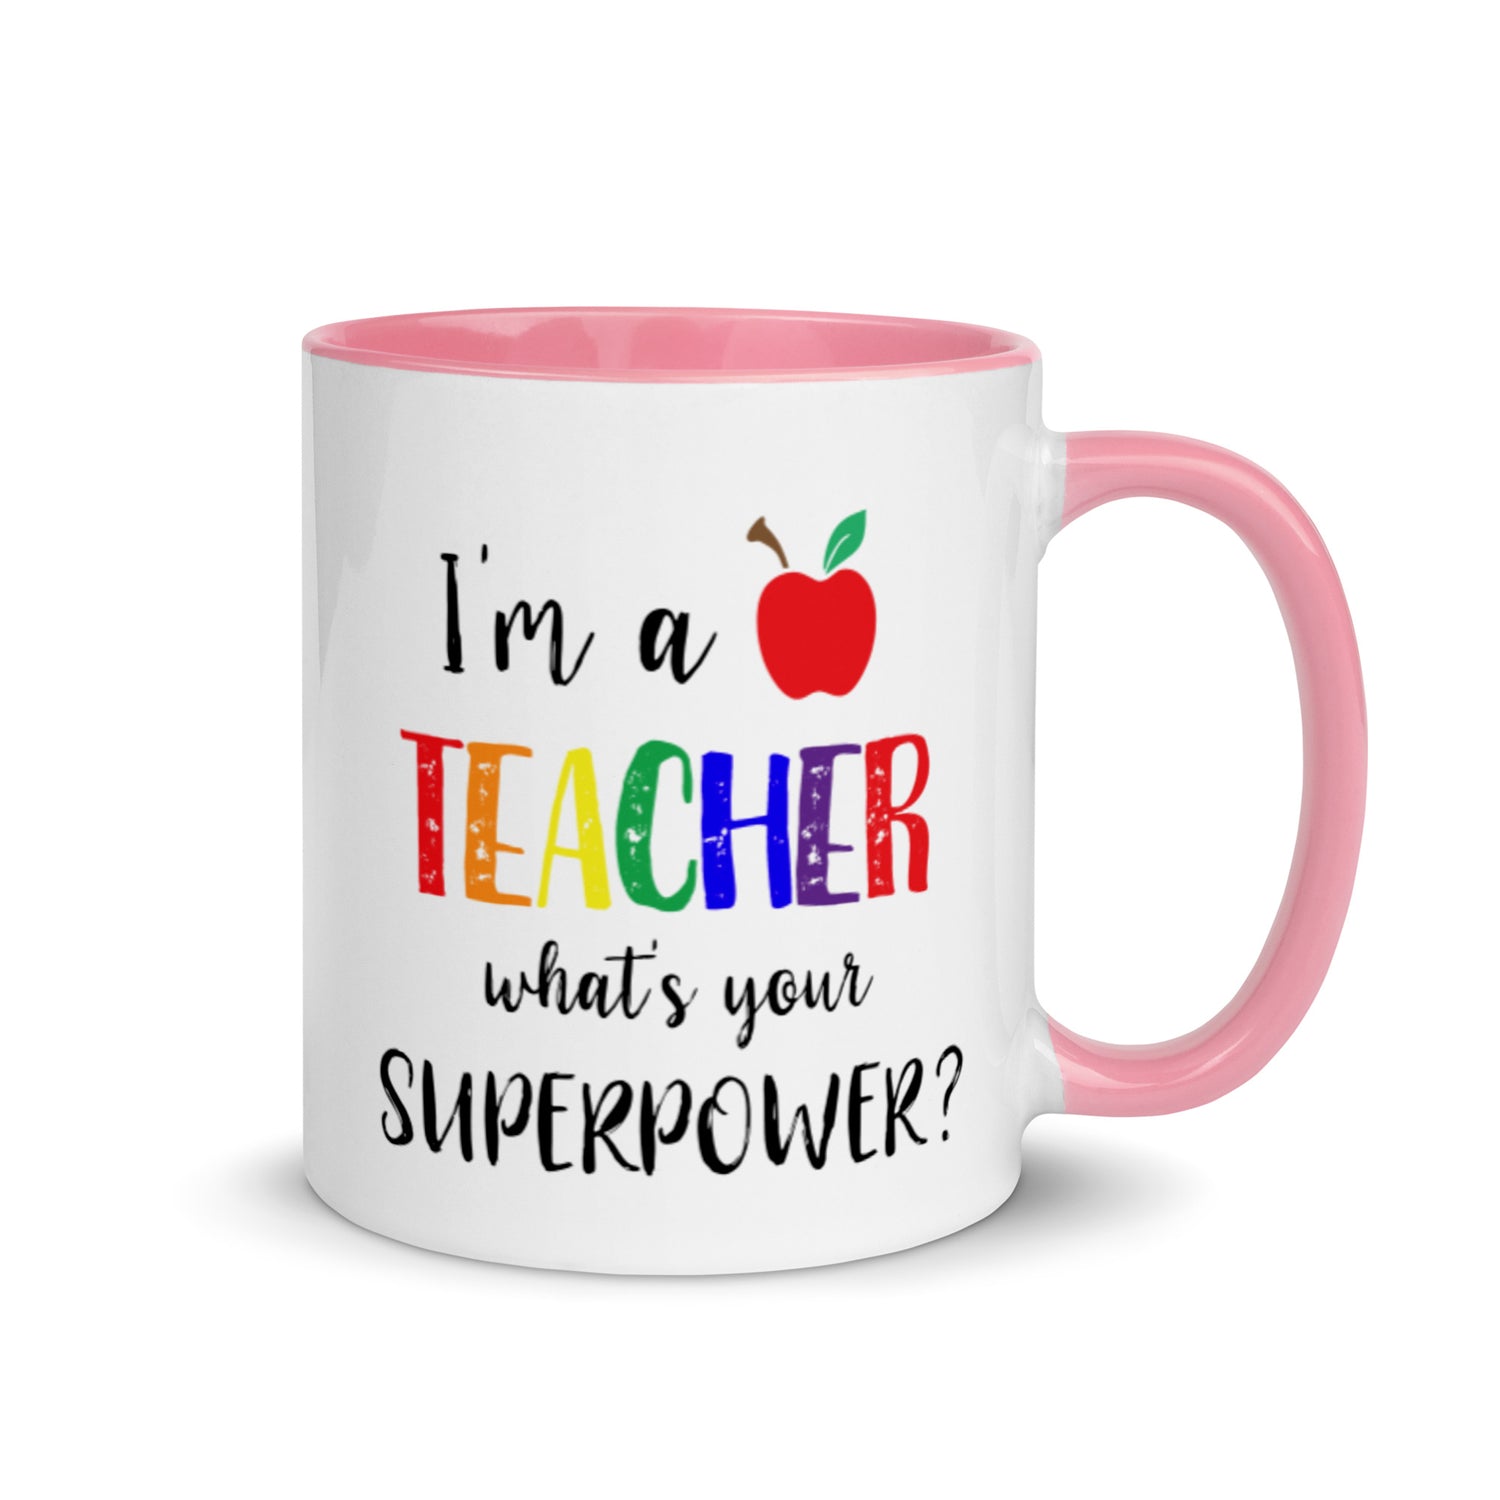 I'm Mom. What's Your Superpower - funny superhero Mother's Day mug